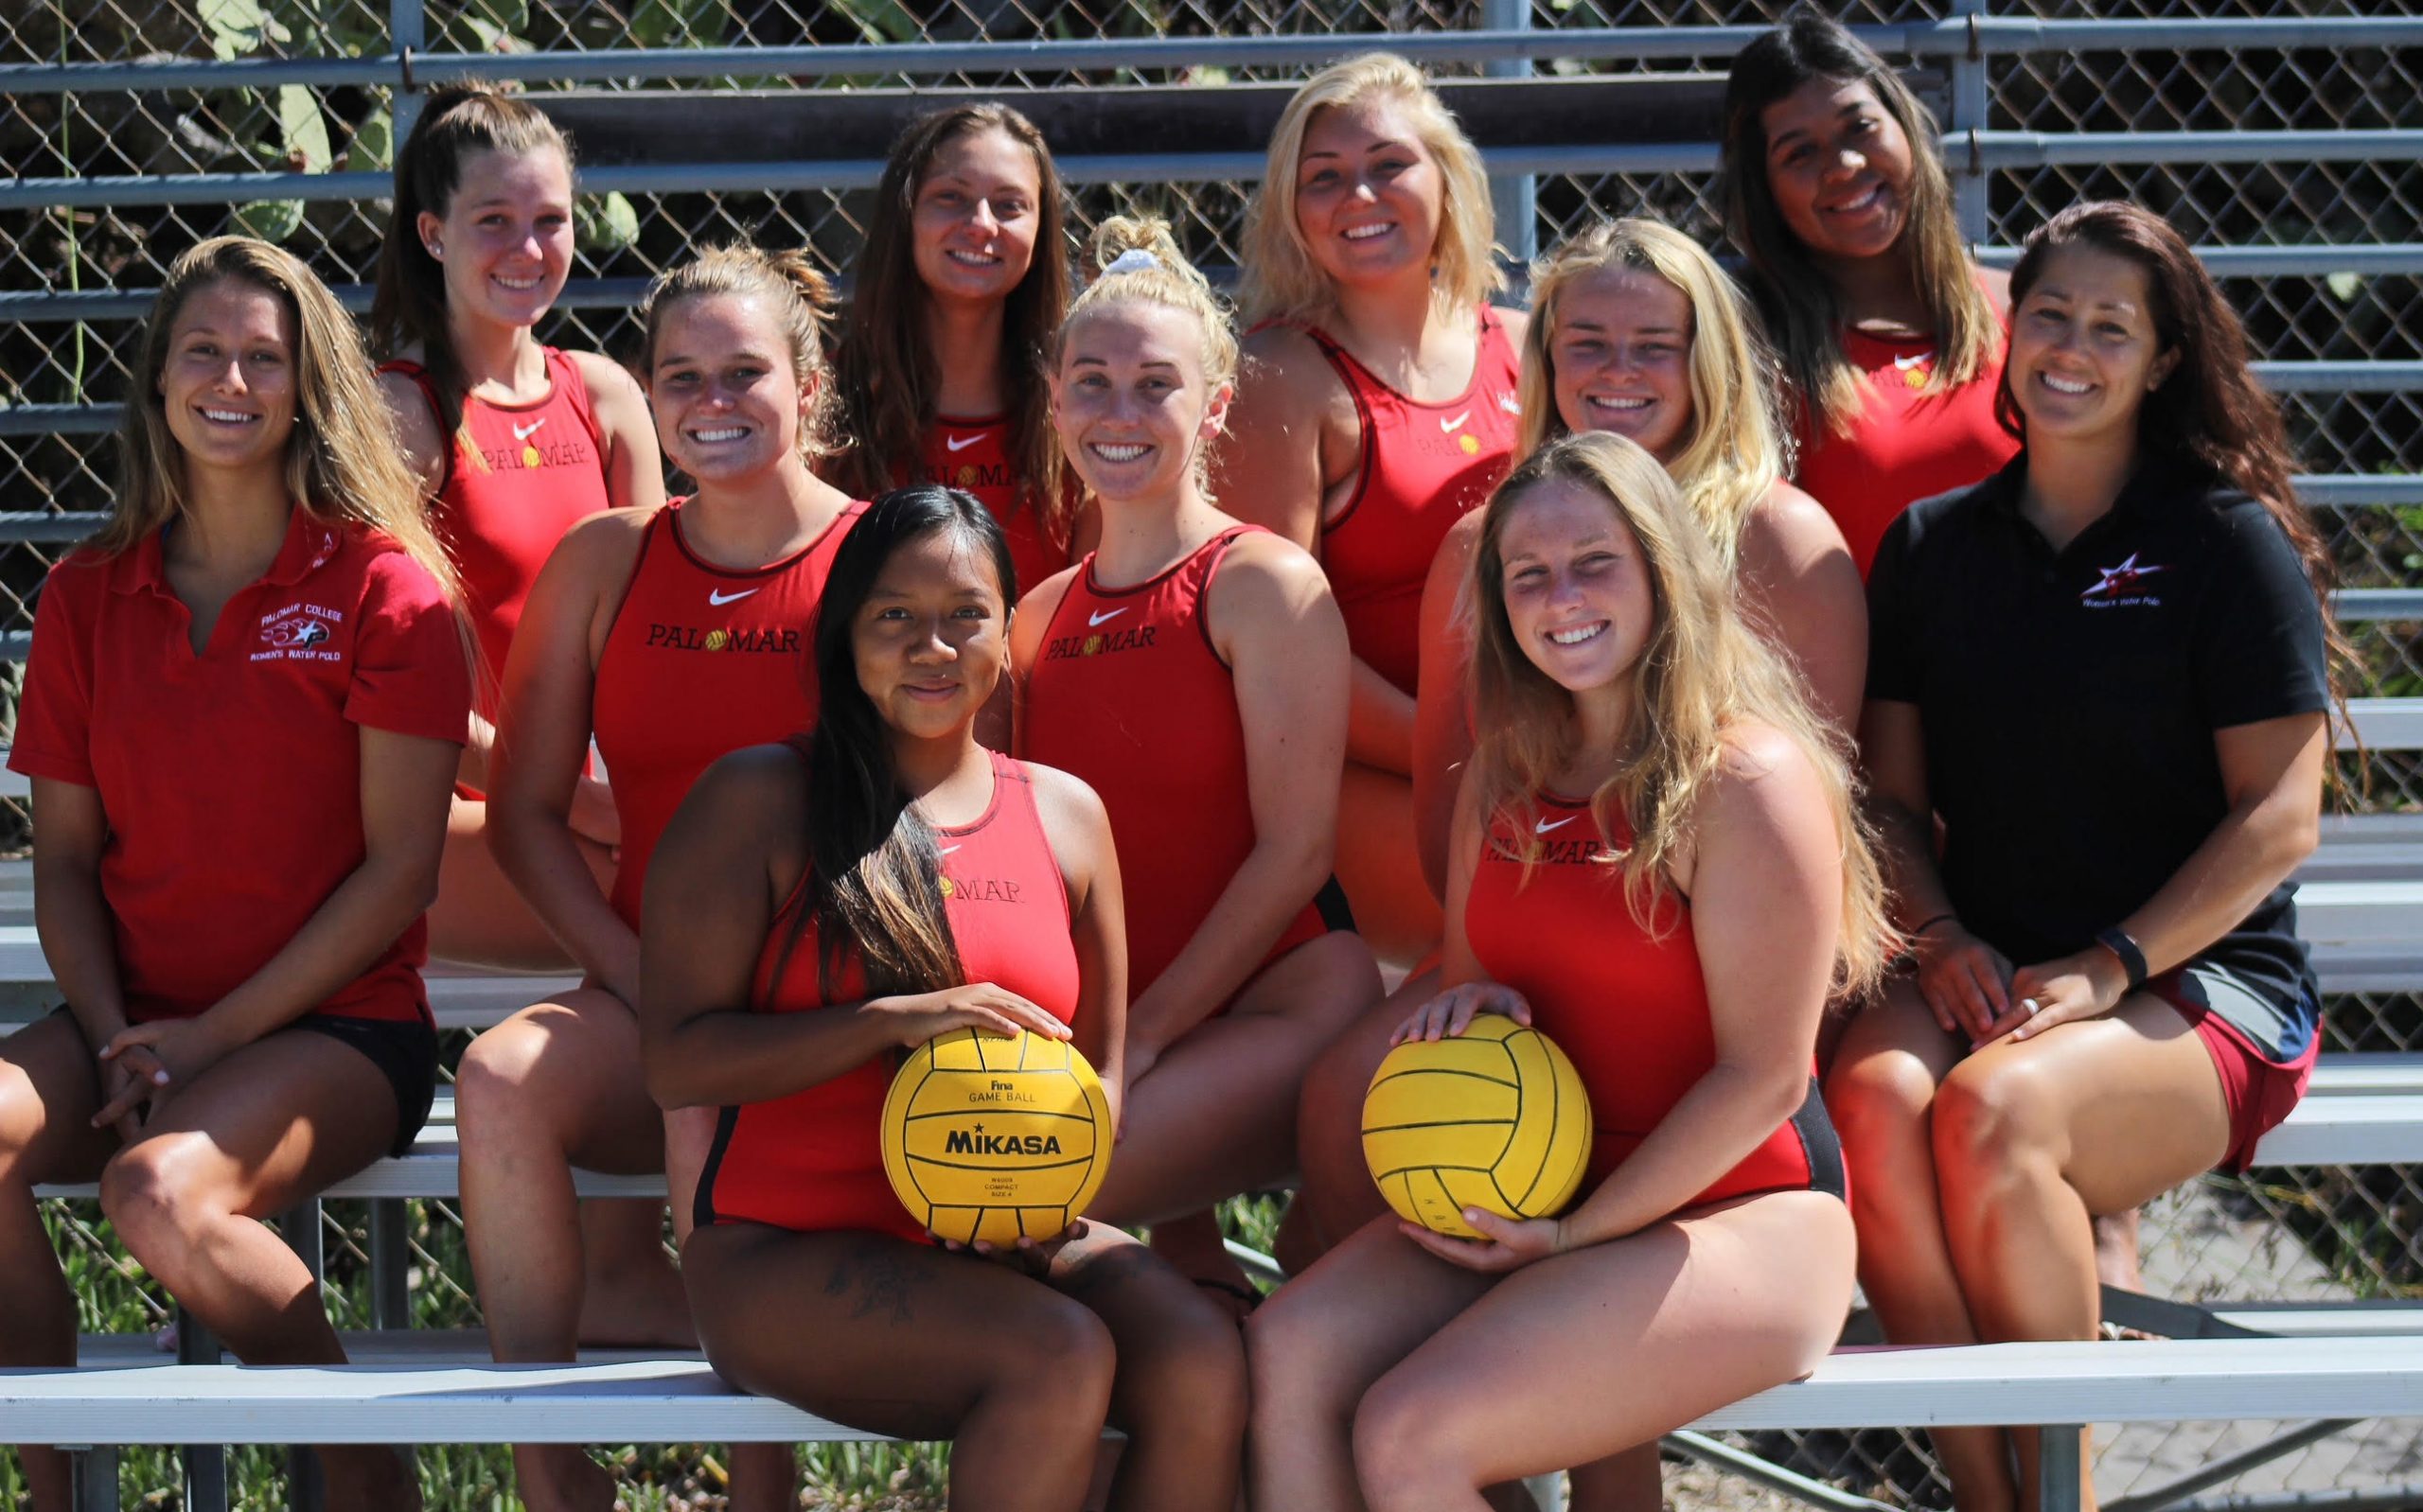 The Palomar water polo players pose together in Spring 2021.